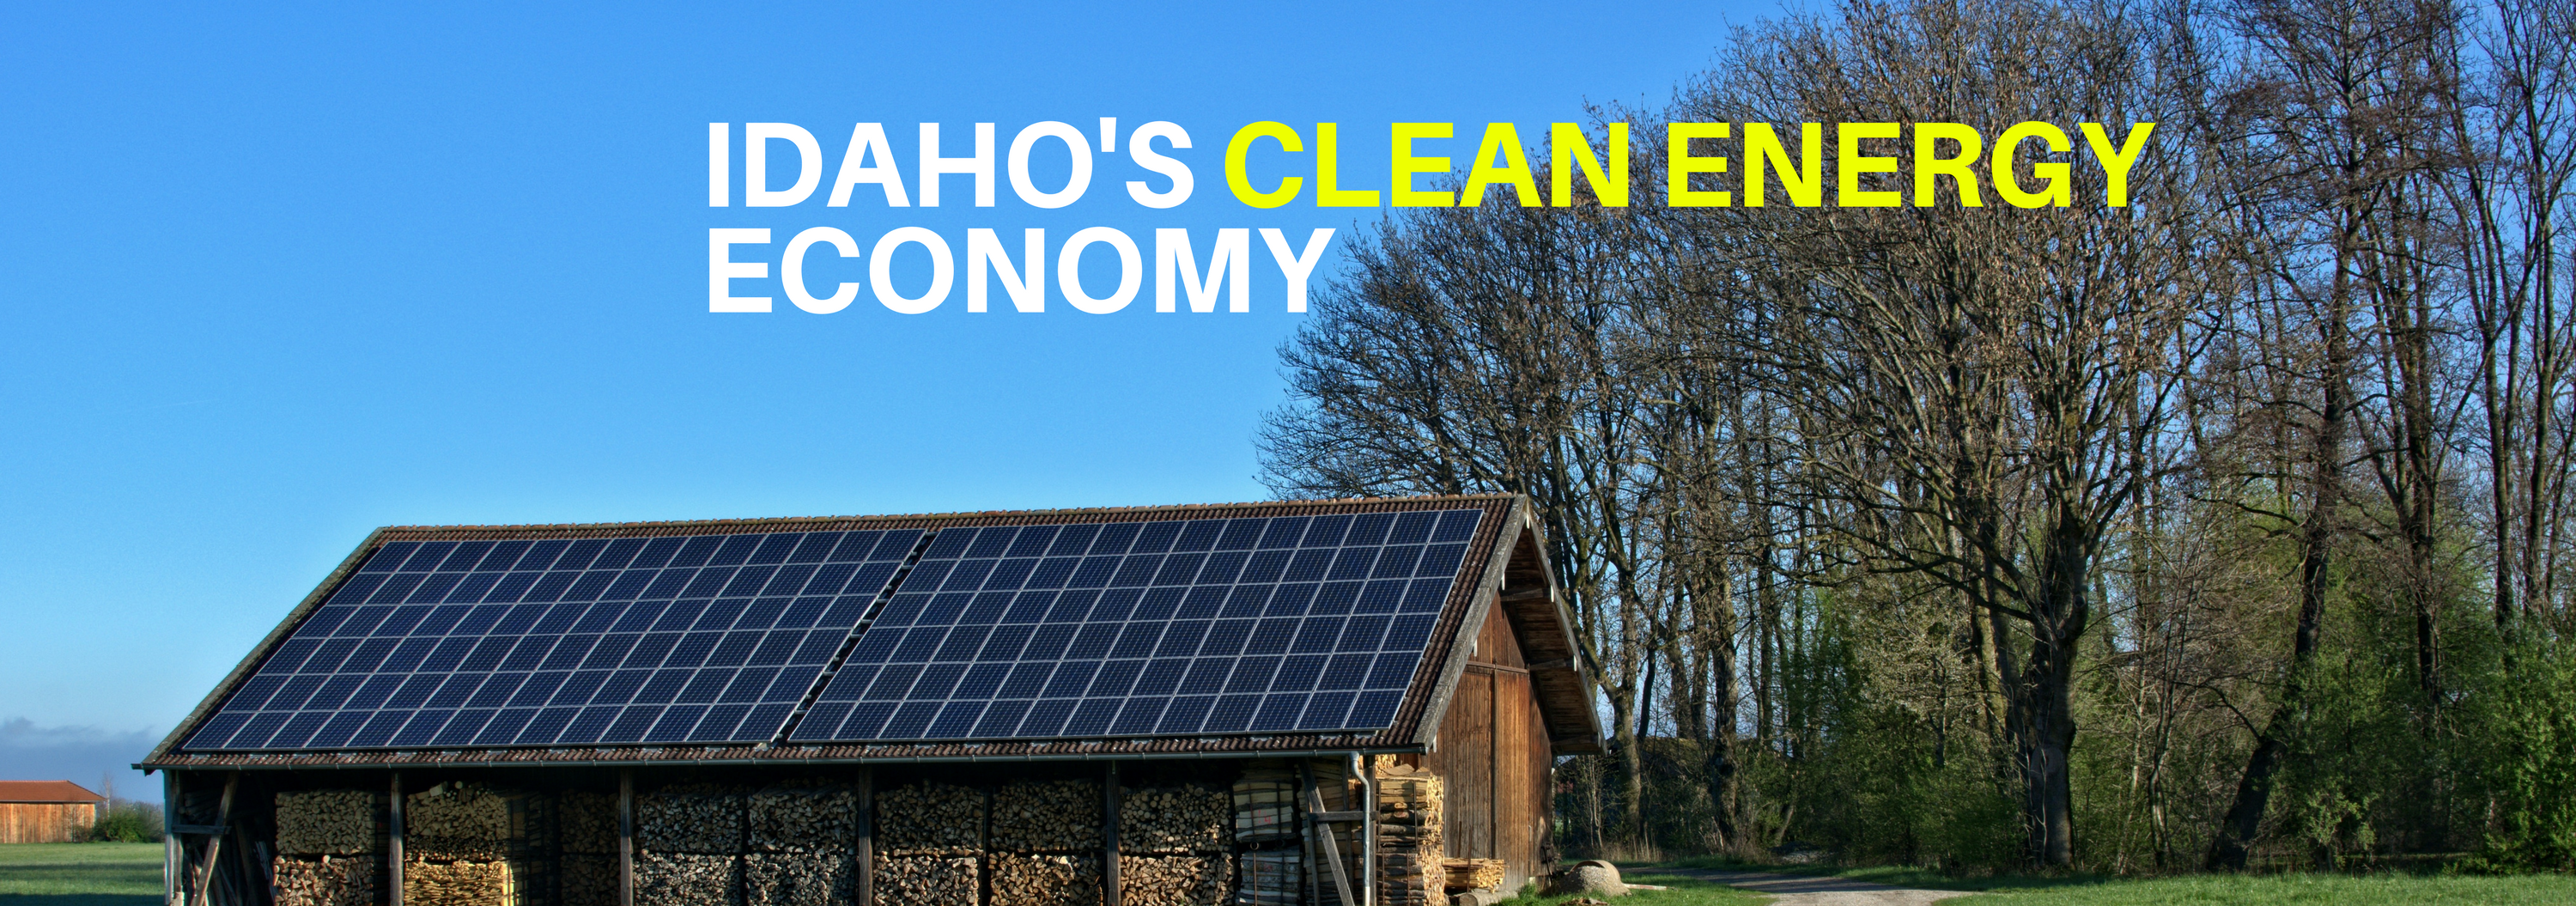 Picture of barn with solar panels on top, says "Idaho's Clean Energy Economy"